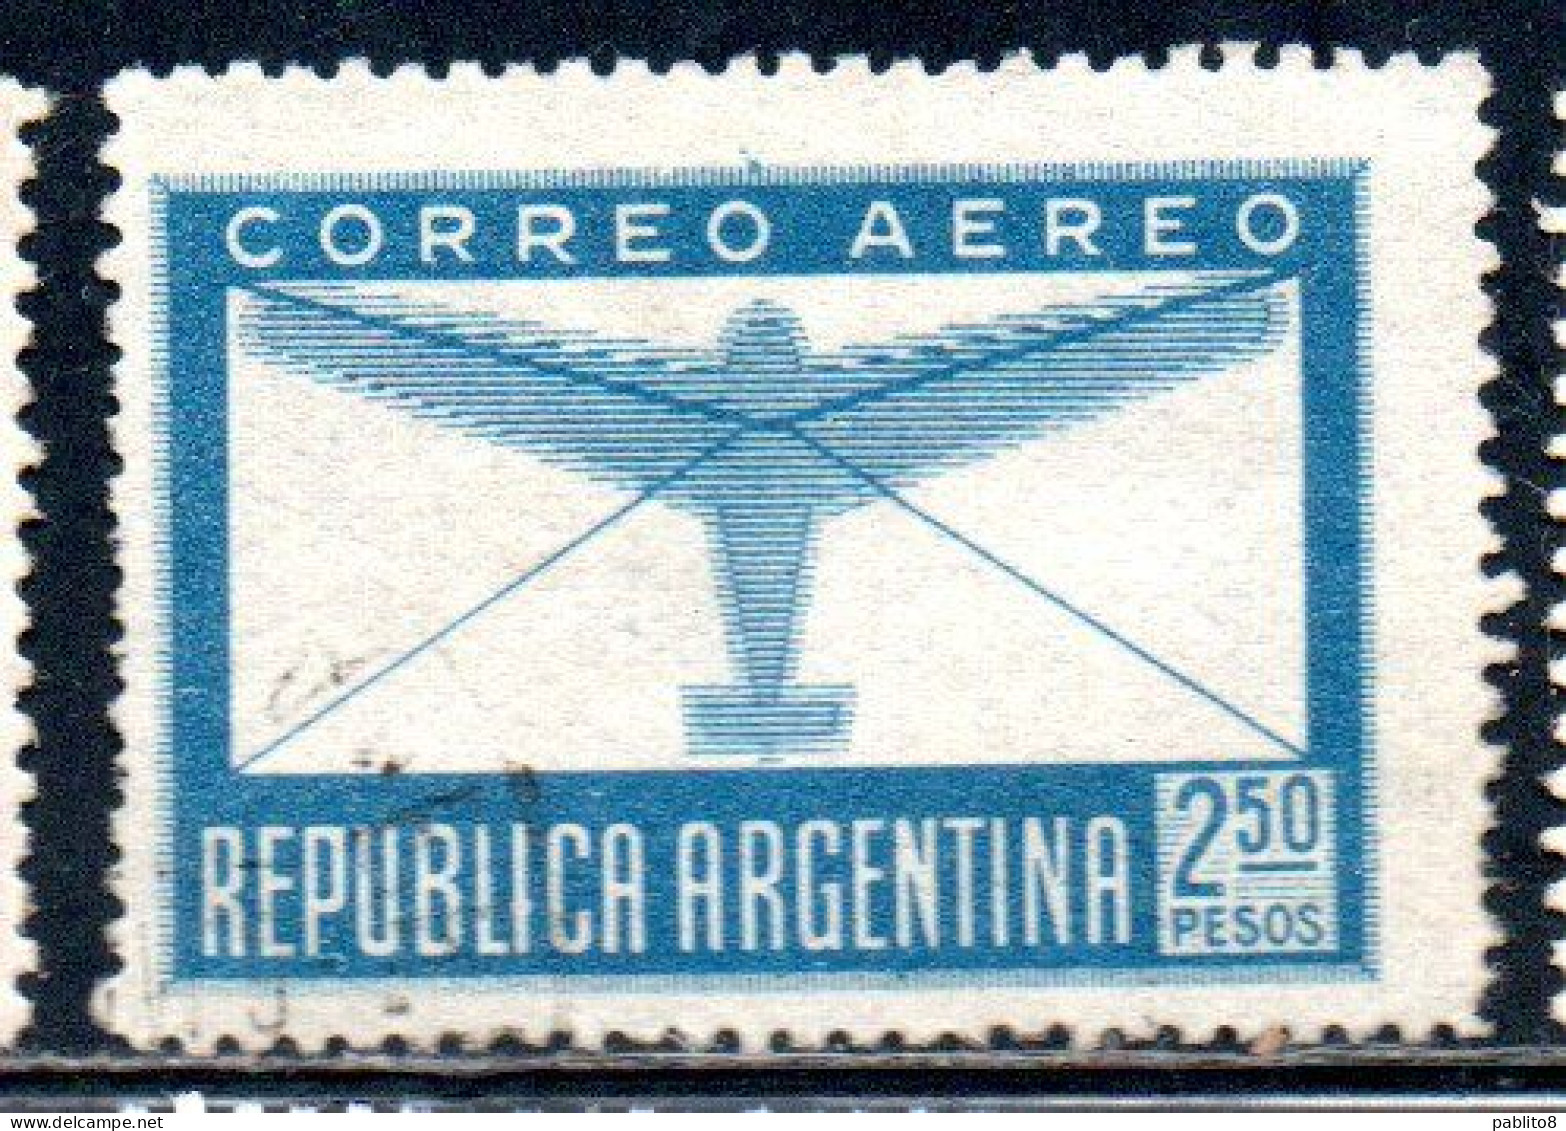 ARGENTINA 1940  AIR POST MAIL CORREO AEREO AIRMAIL PLANE AND LETTER 2.50p USED USADO OBLITERE' - Luftpost